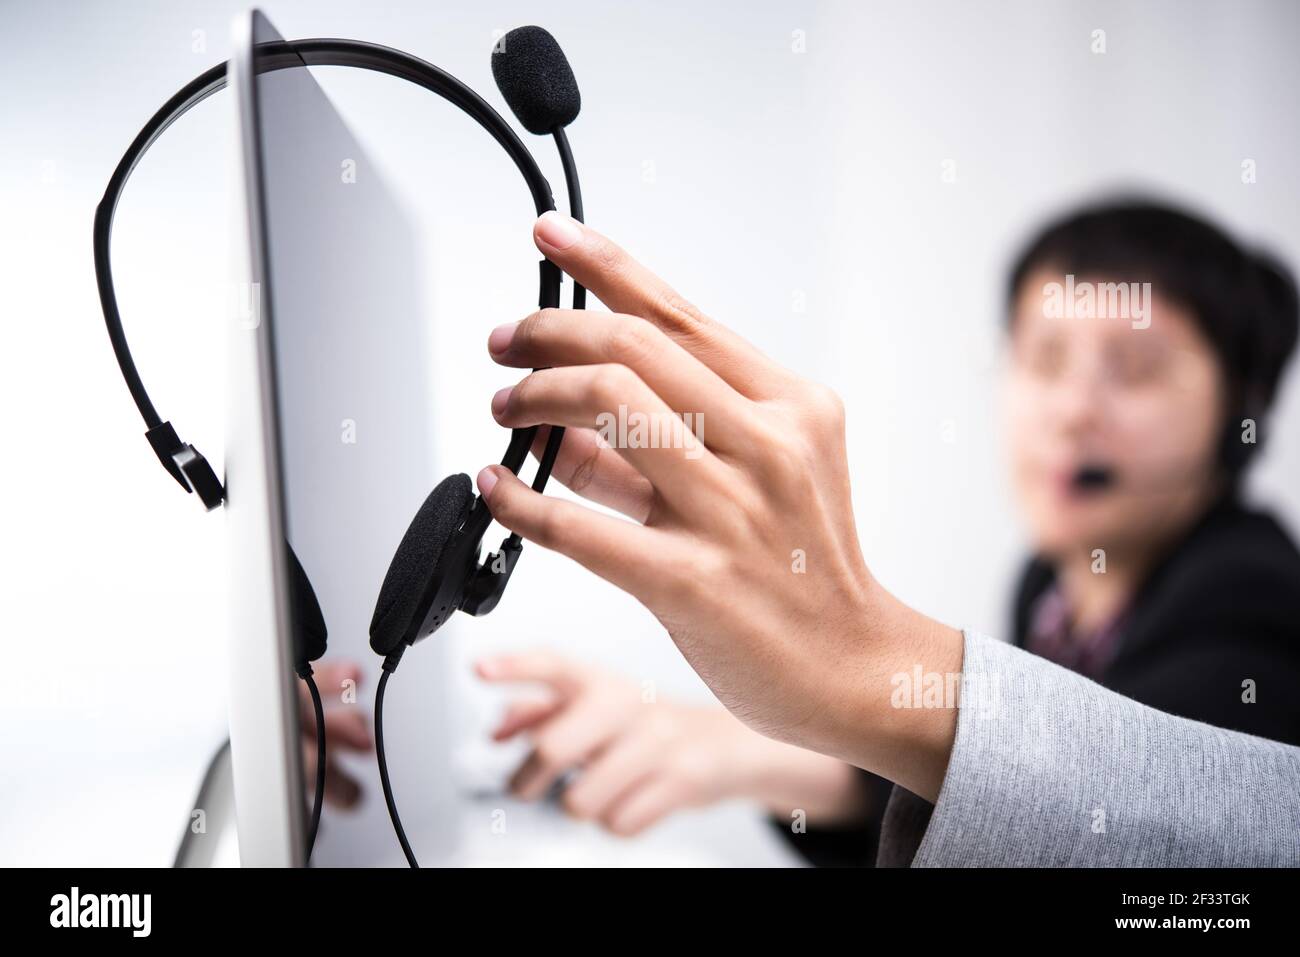 Hand picking up headphone that hanging on computer screen Stock Photo